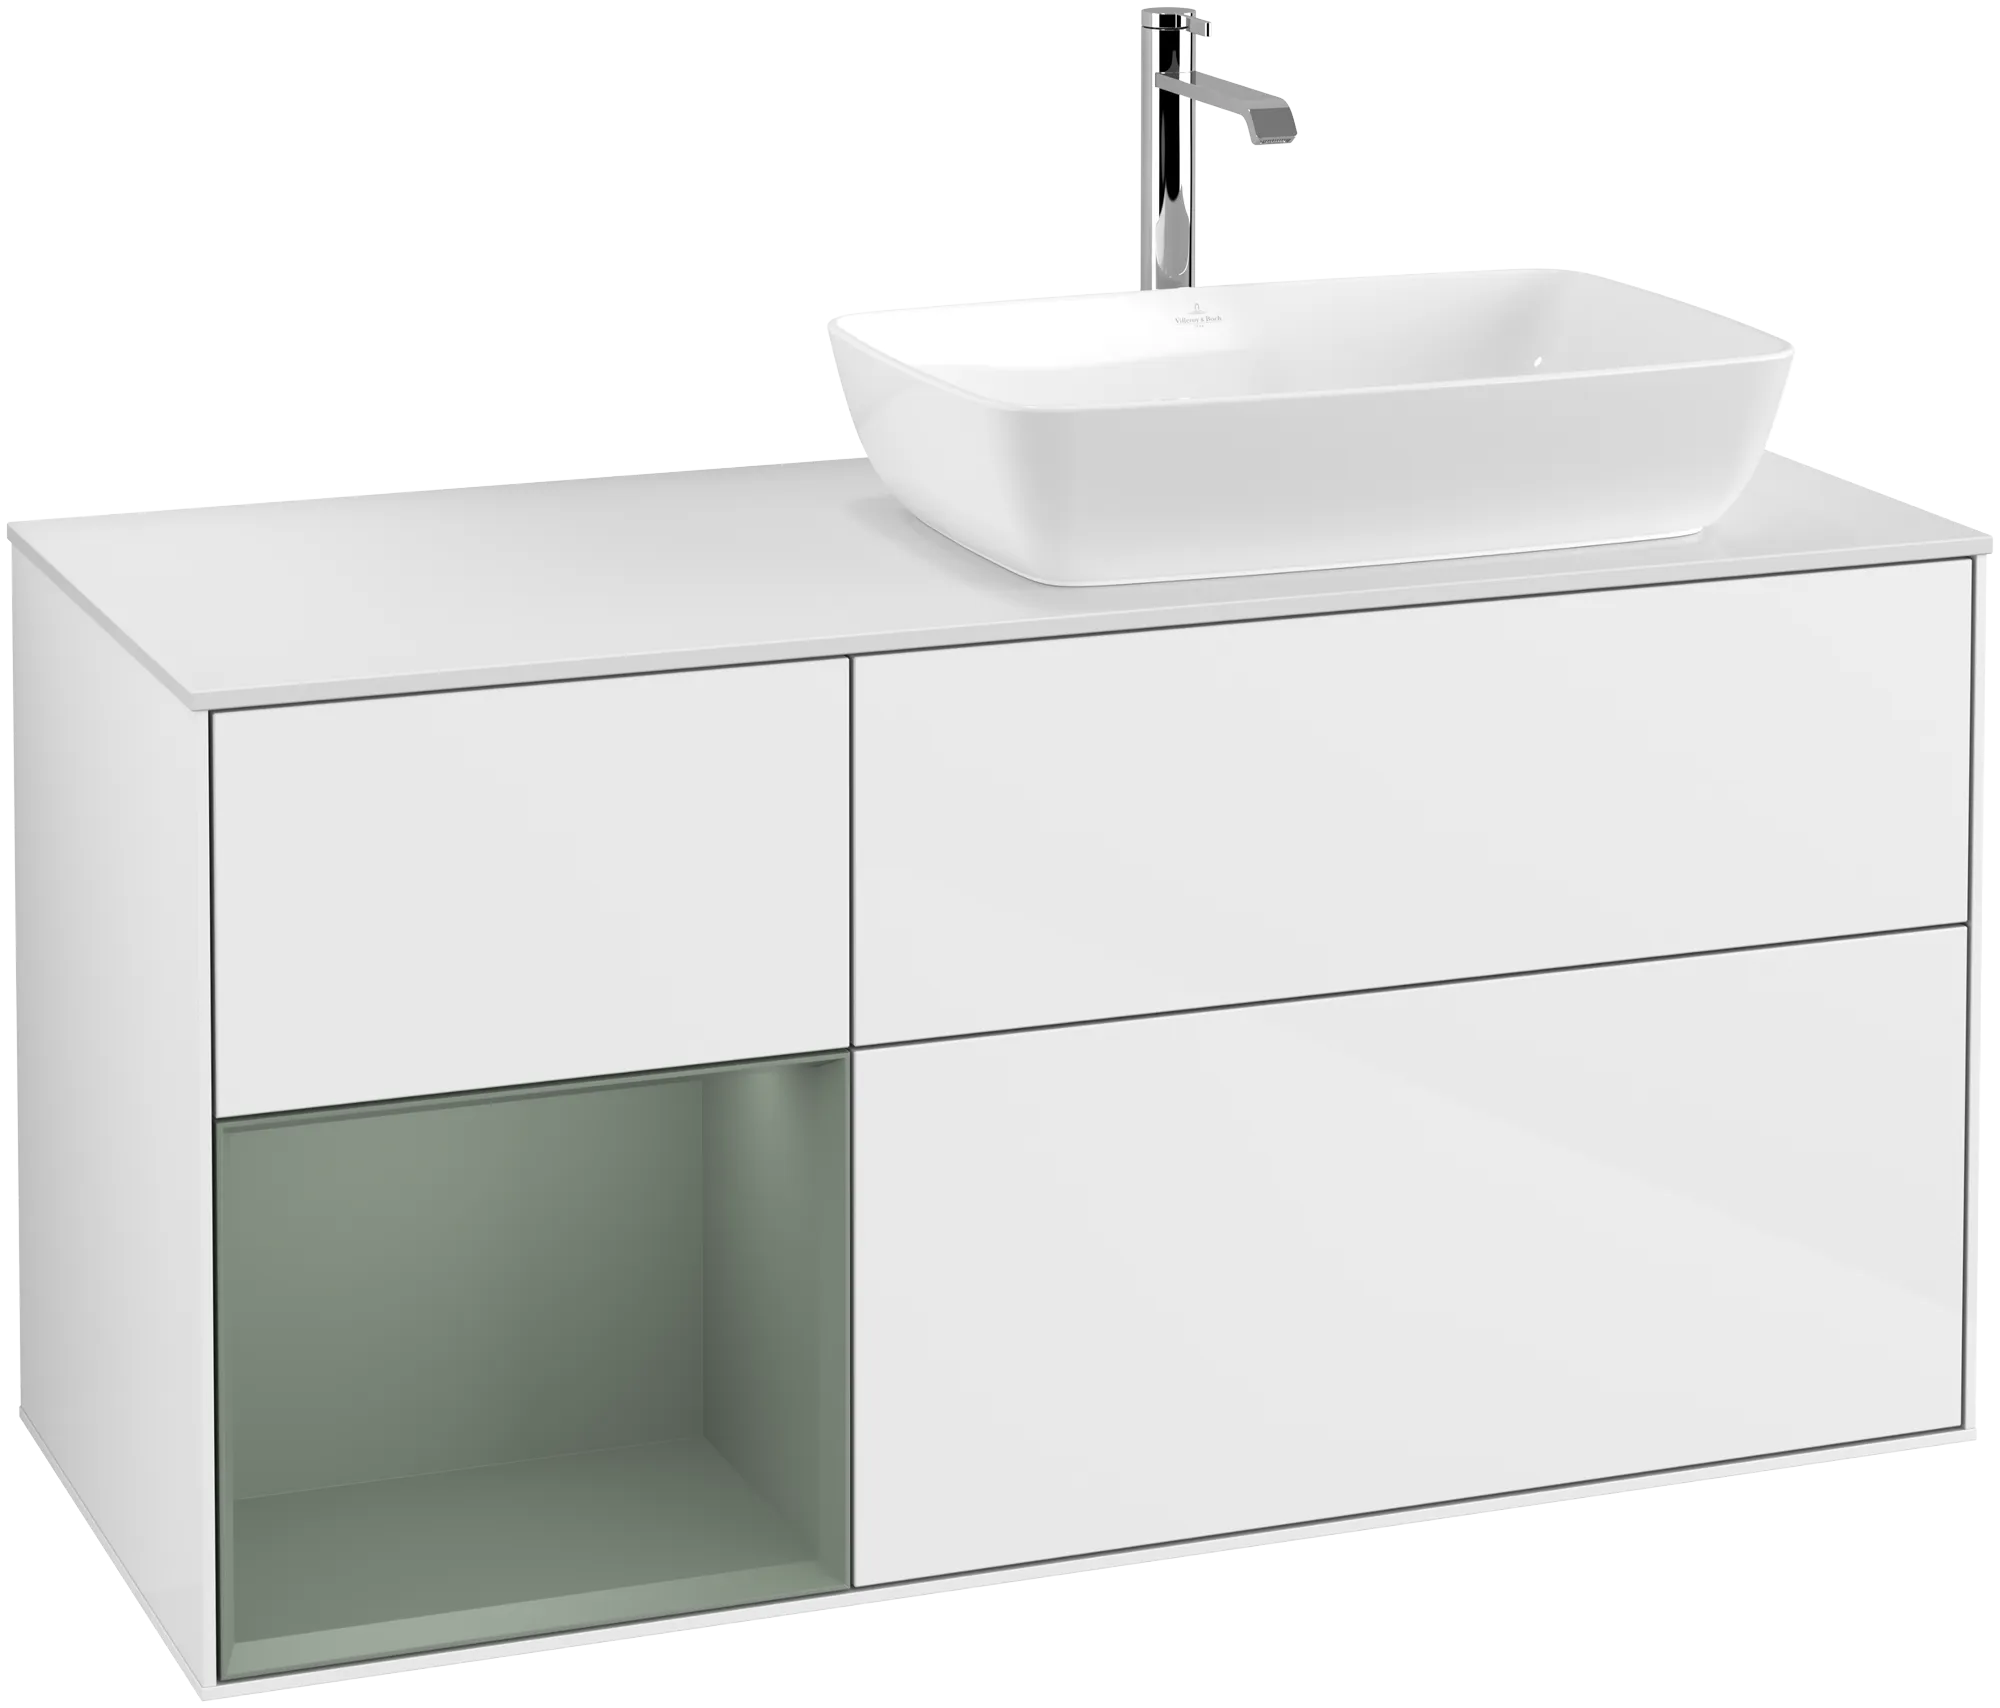 Зображення з  VILLEROY BOCH Finion Vanity unit, with lighting, 3 pull-out compartments, 1200 x 603 x 501 mm, Glossy White Lacquer / Olive Matt Lacquer / Glass White Matt #G801GMGF